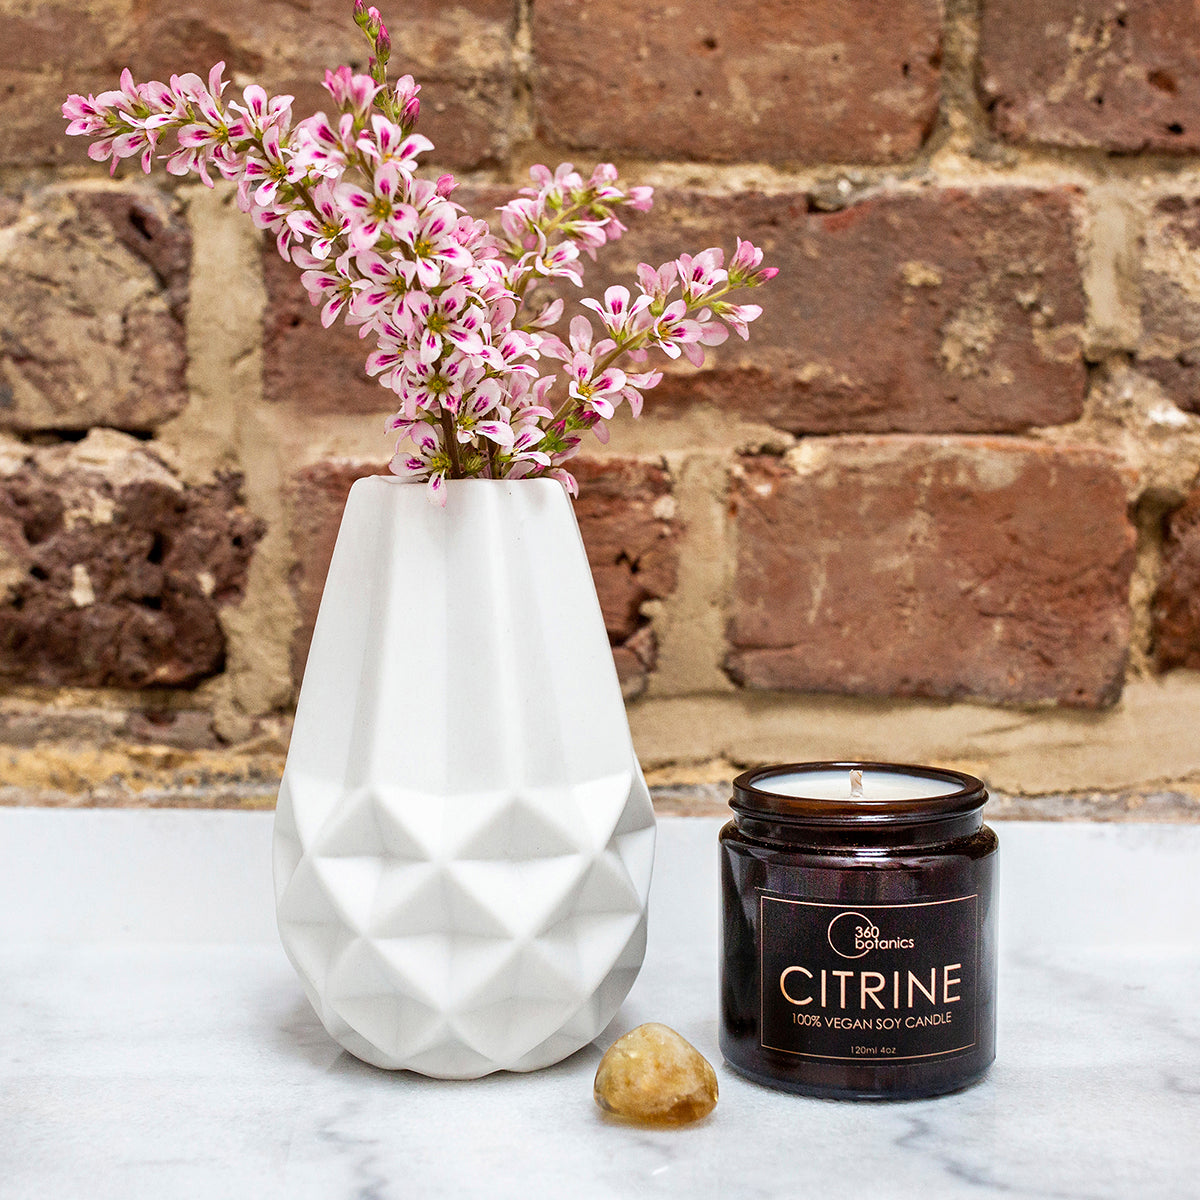  A white geometric vase with pink flowers next to an unlit 360 Botanics Citrine 100% vegan soy candle in a dark glass jar, accompanied by a citrine crystal, set against a brick wall on a white surface.